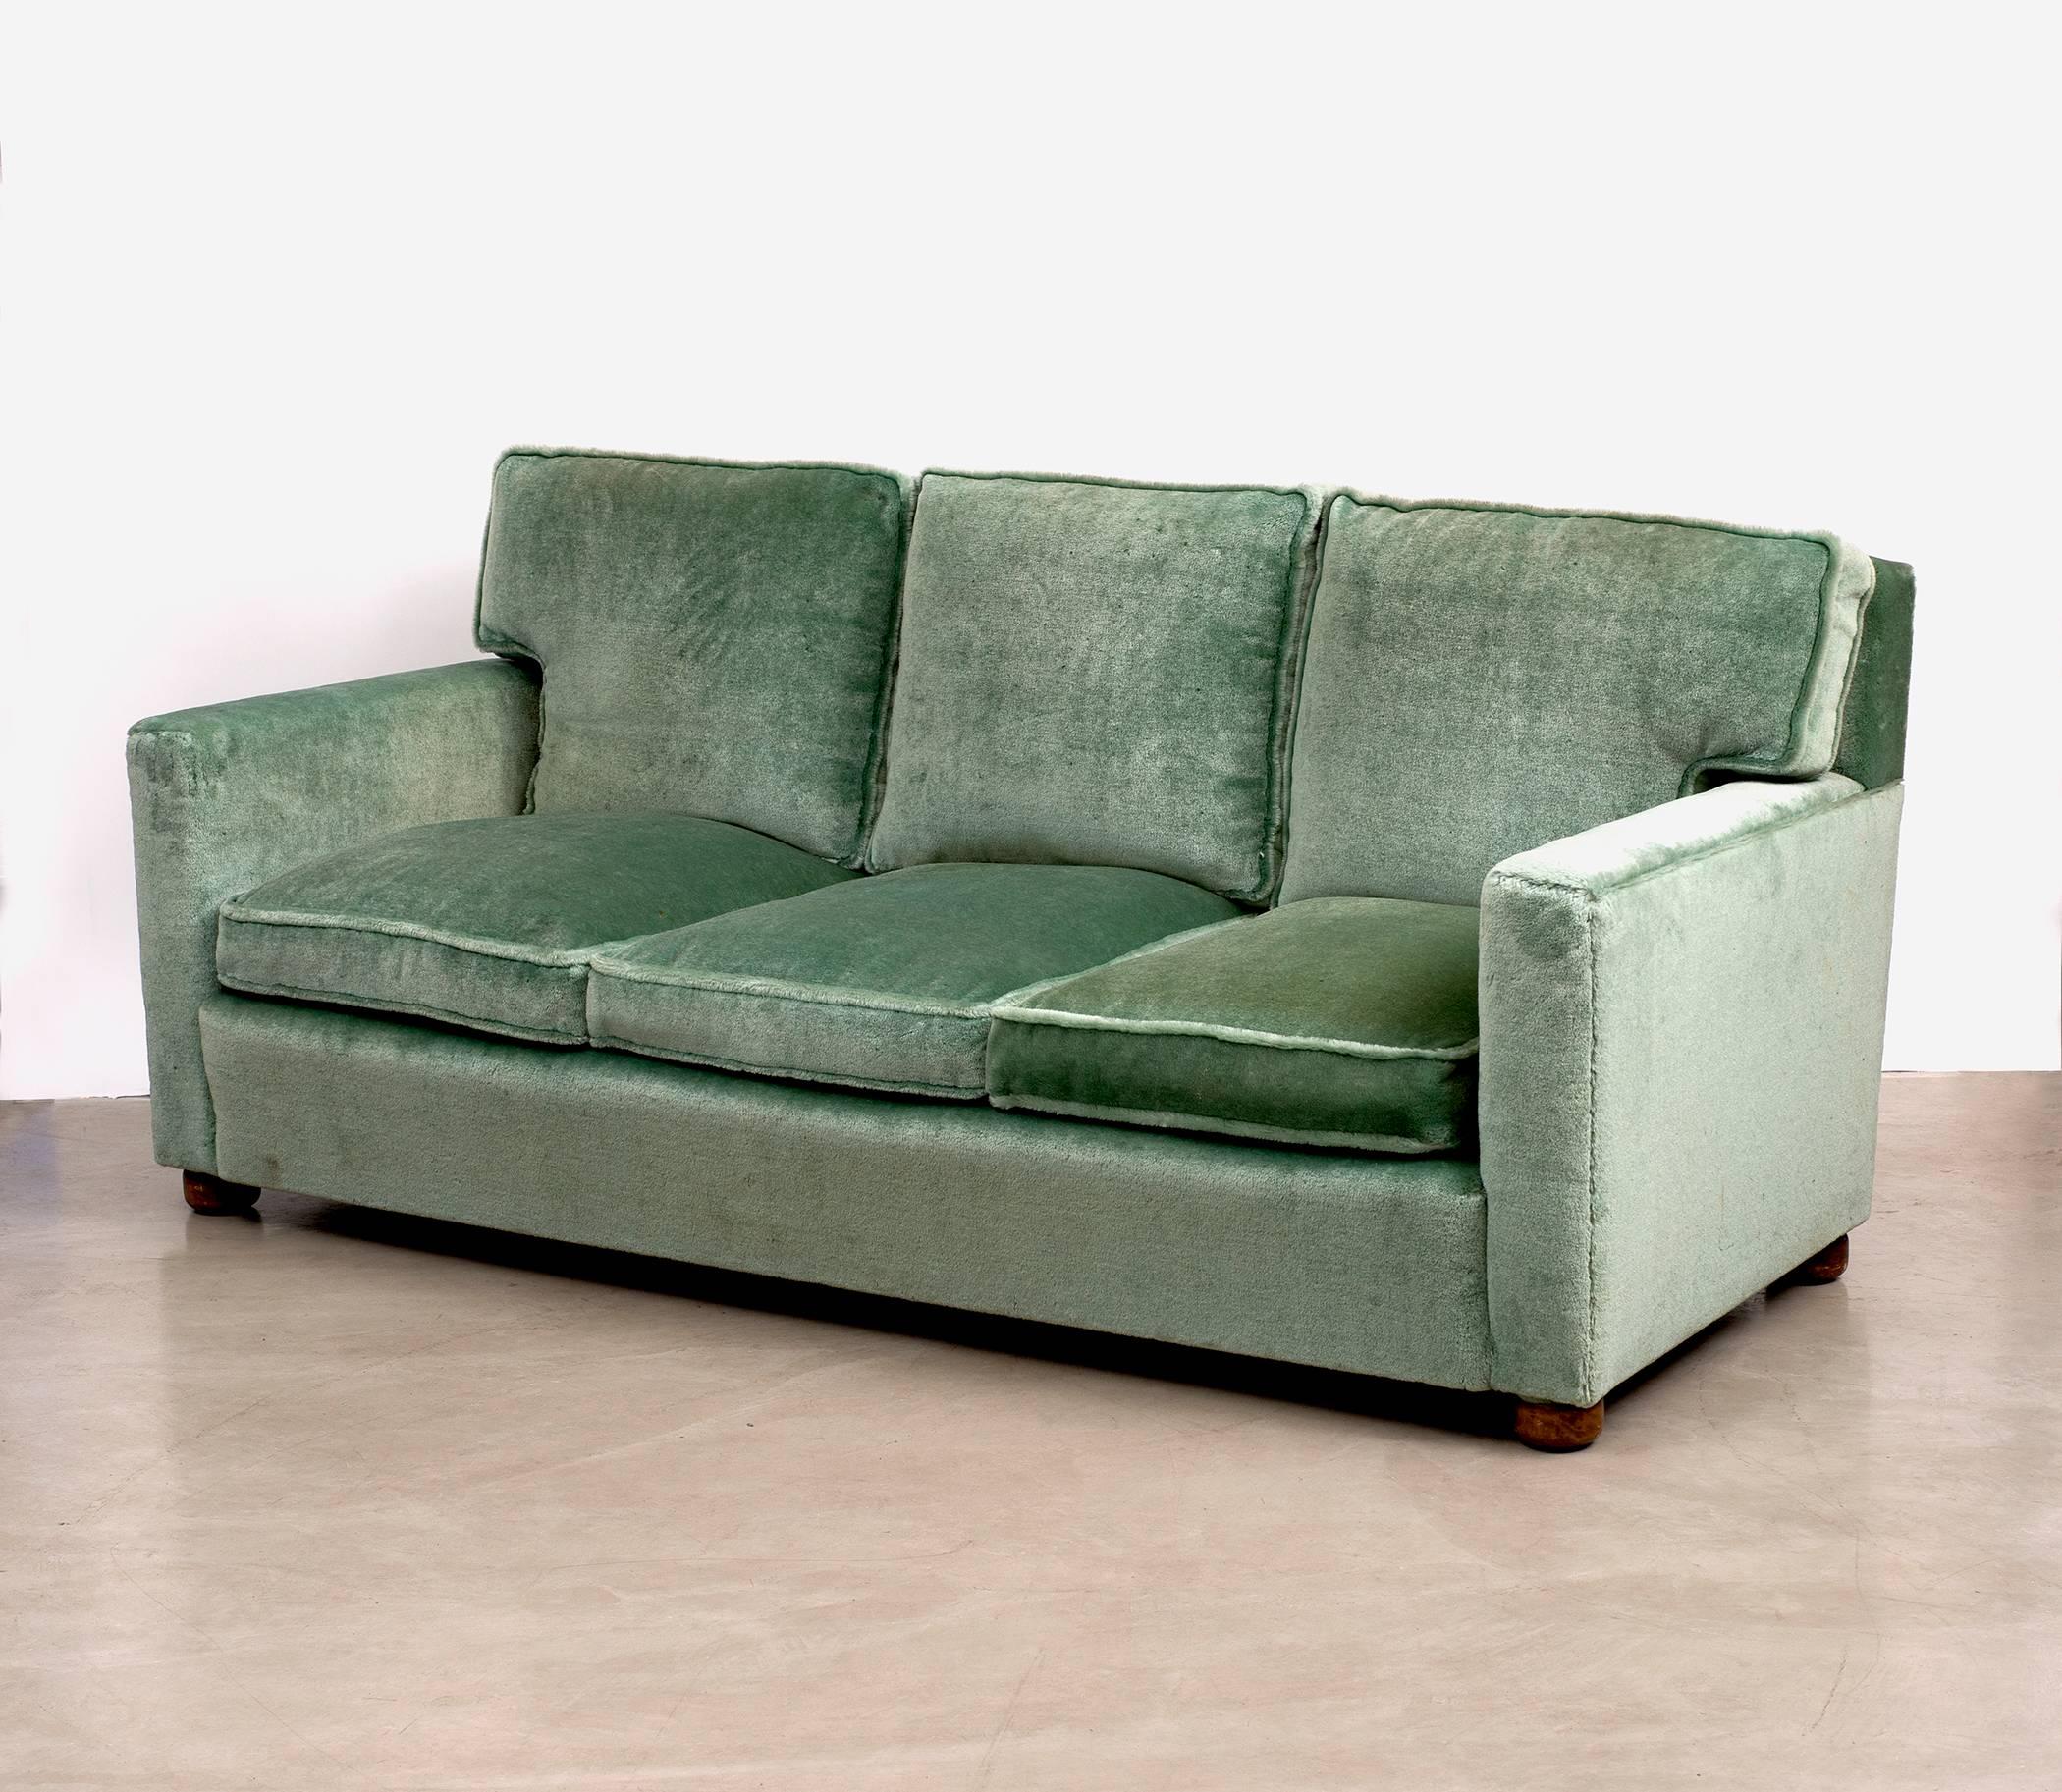 A sofa, model 3031, also known as the 